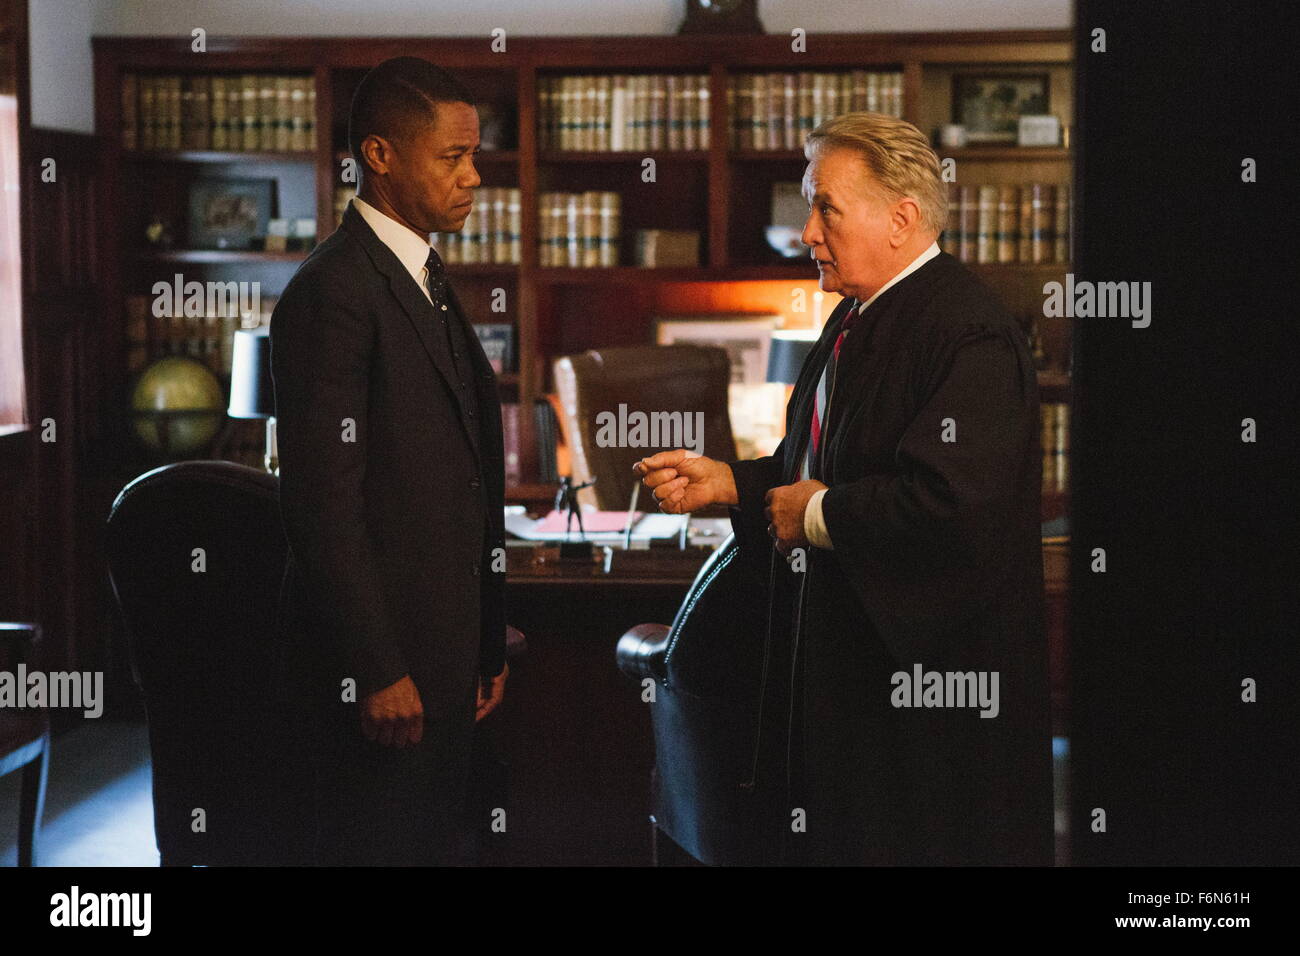 RELEASE DATE: January 9, 2015 TITLE: Selma STUDIO: Paramount Pictures DIRECTOR: Ava DuVernay PLOT: Martin Luther King and the civil rights marches of Selma, Alabama, that changed the United States for ever. PICTURED: CUBA GOODING JR as Fred gray and MARTIN SHEEN as Frank Minis Johnson Stock Photo